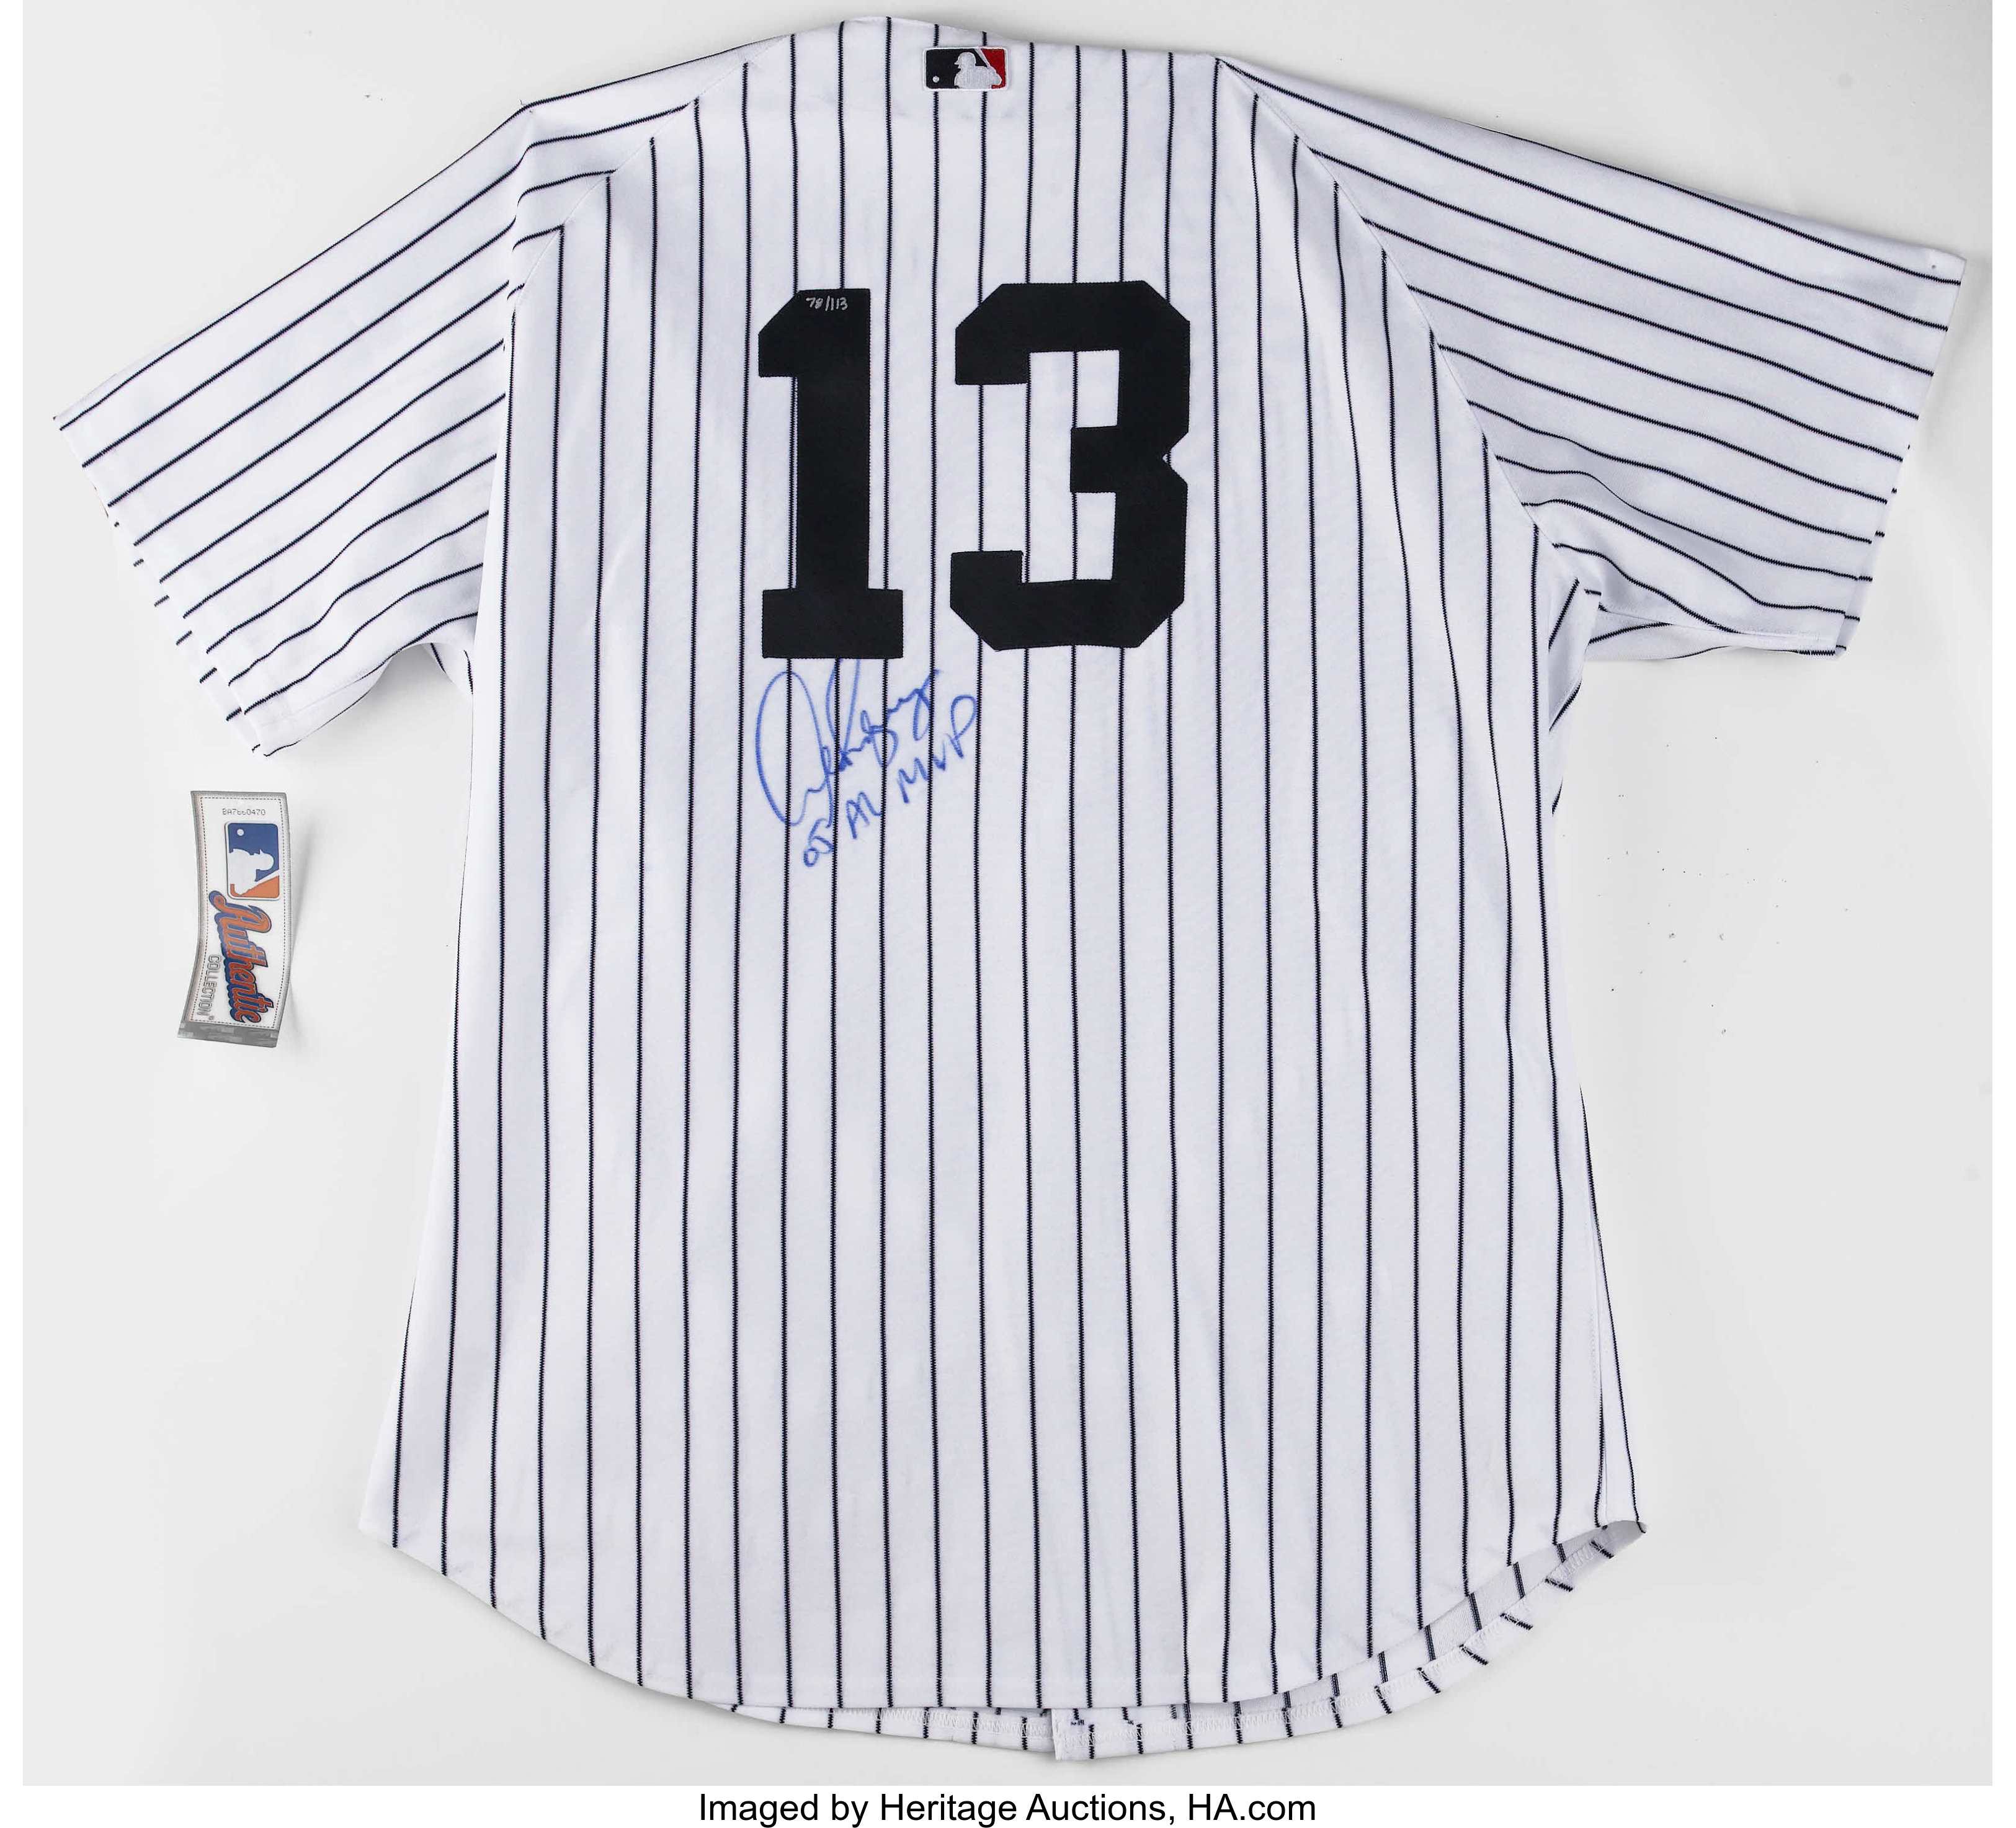 Alex Rodriguez Signed Jersey. A-Rod has dazzled fans from coast to